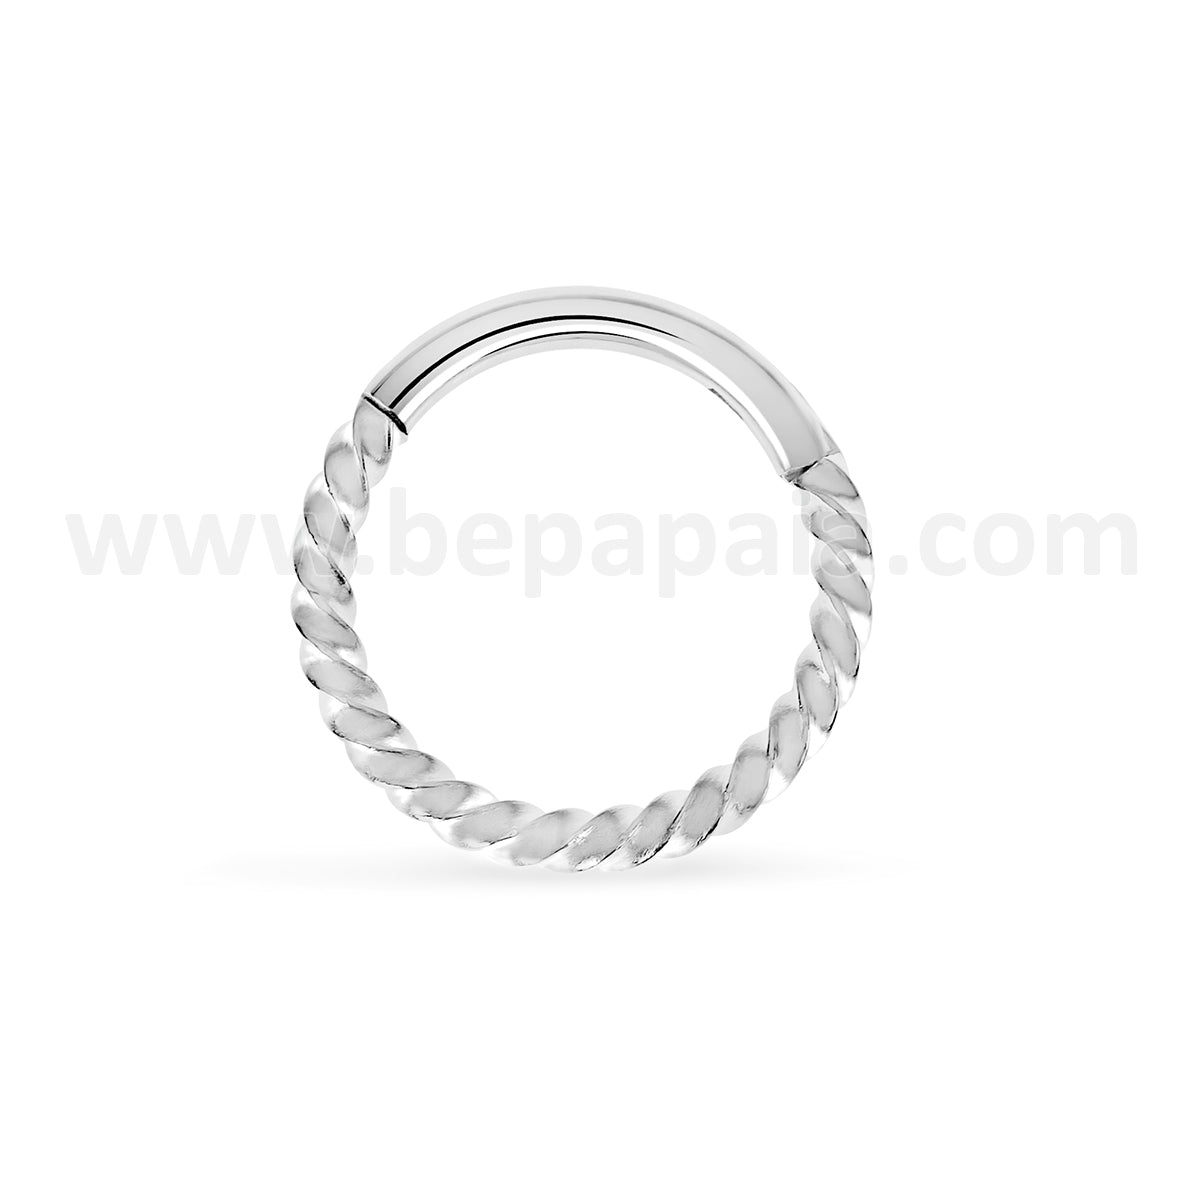 Surgical steel hinged segment ring braided